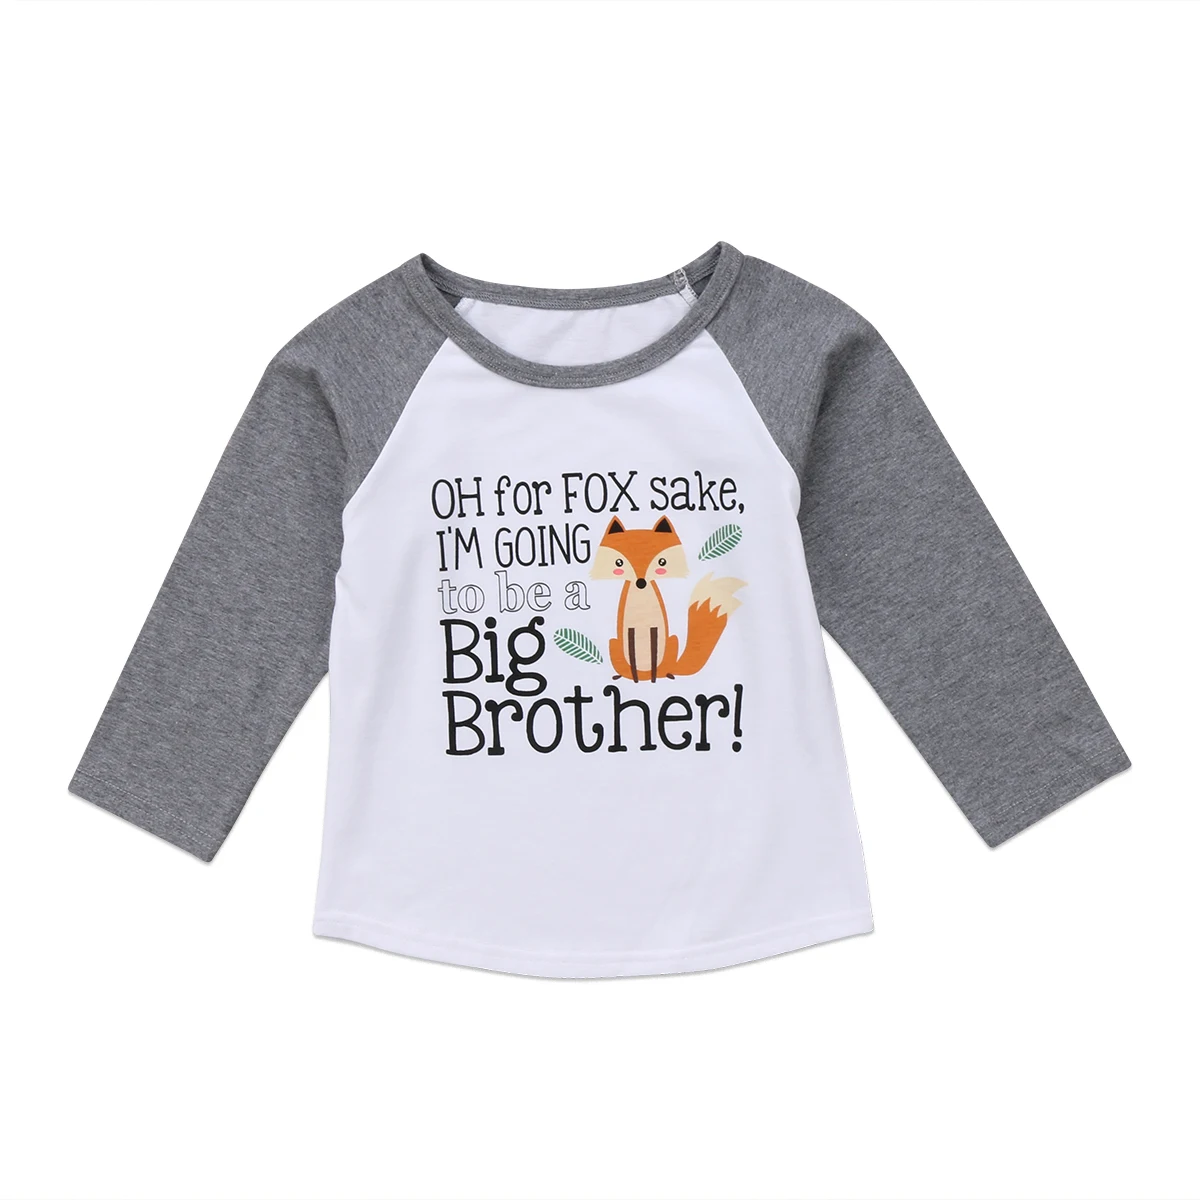 

Fox Print Tops Lovely Baby Brother Big Brother T shirt Kids Baby Boys Long Sleeve Big Brother T-shirt Cotton Clothes For 6M-4T